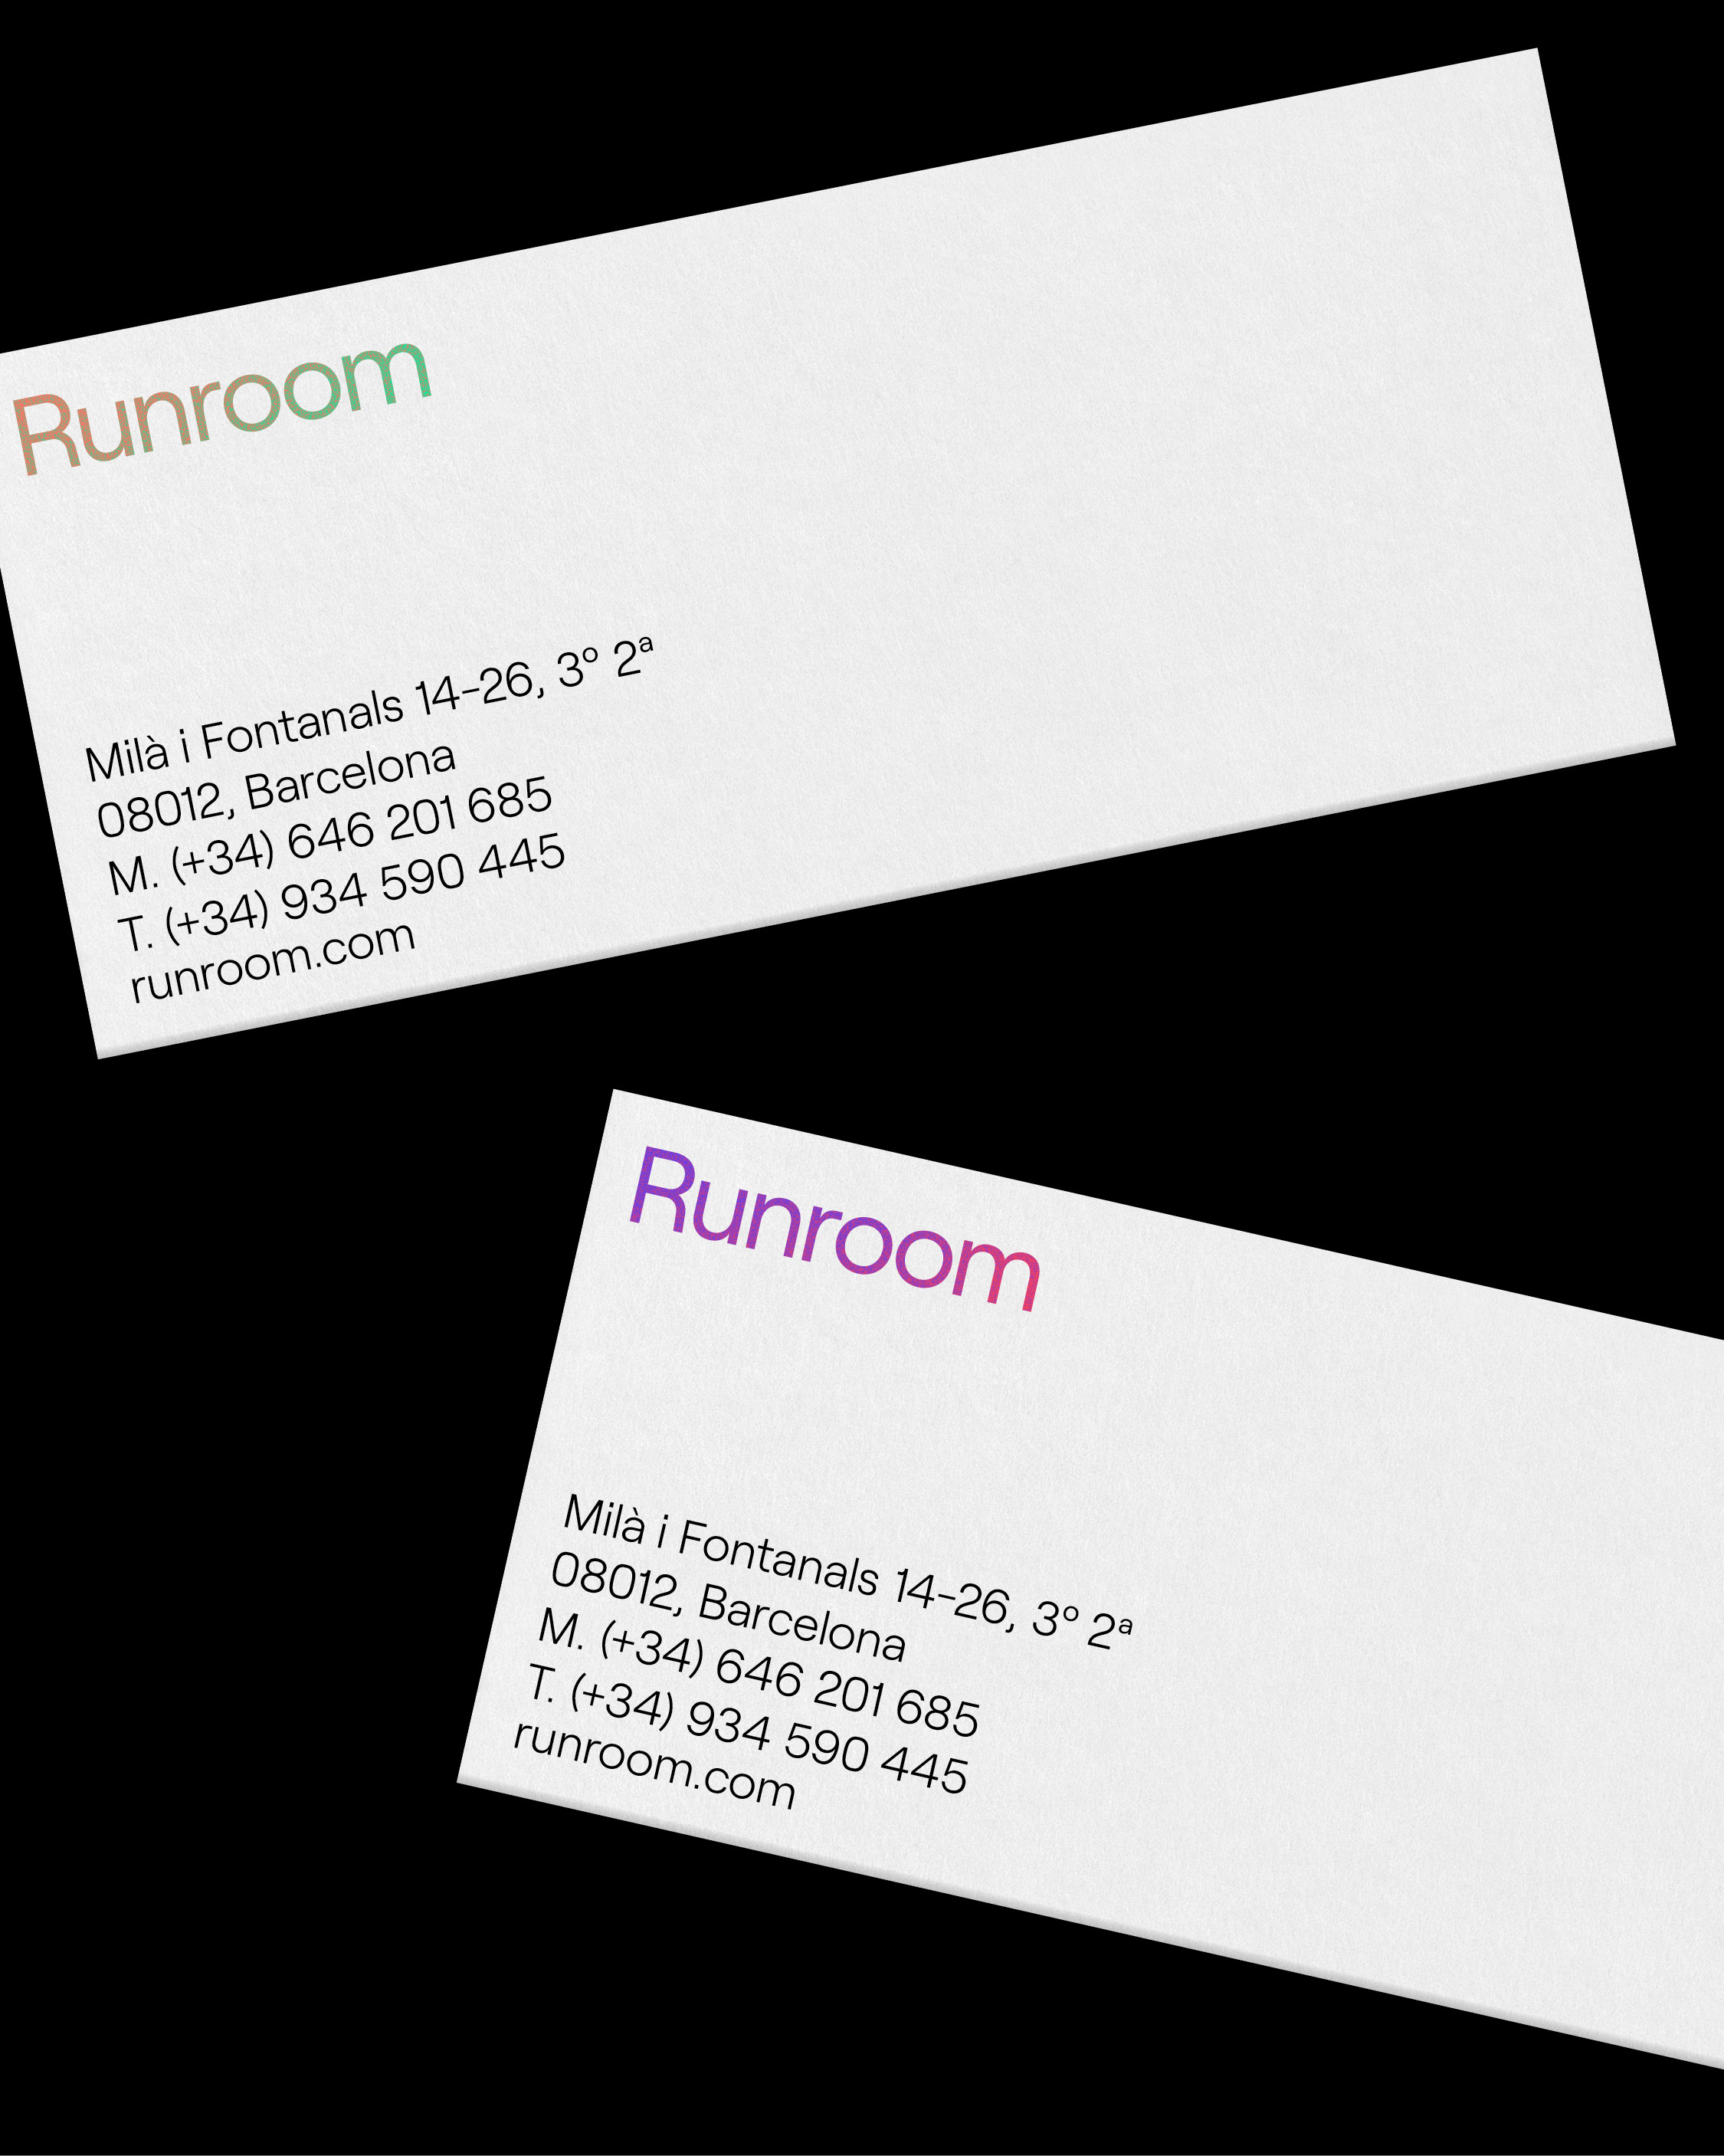 New propositions for Runroom | FOLCH